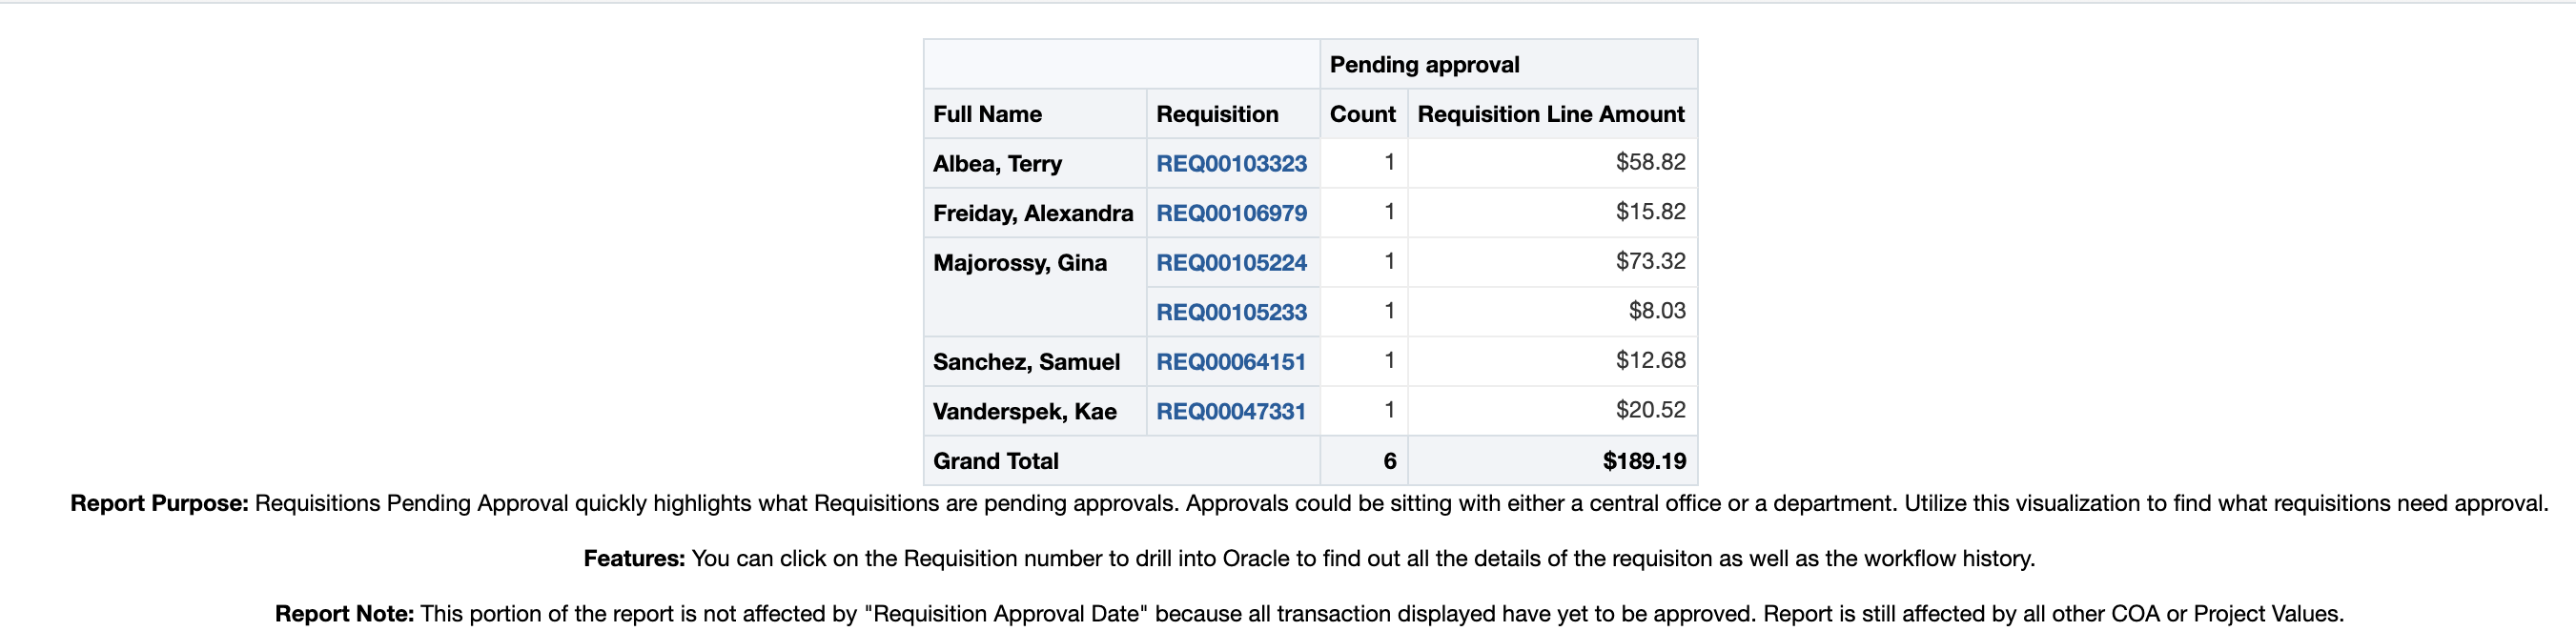 Chart of what is still pending approval